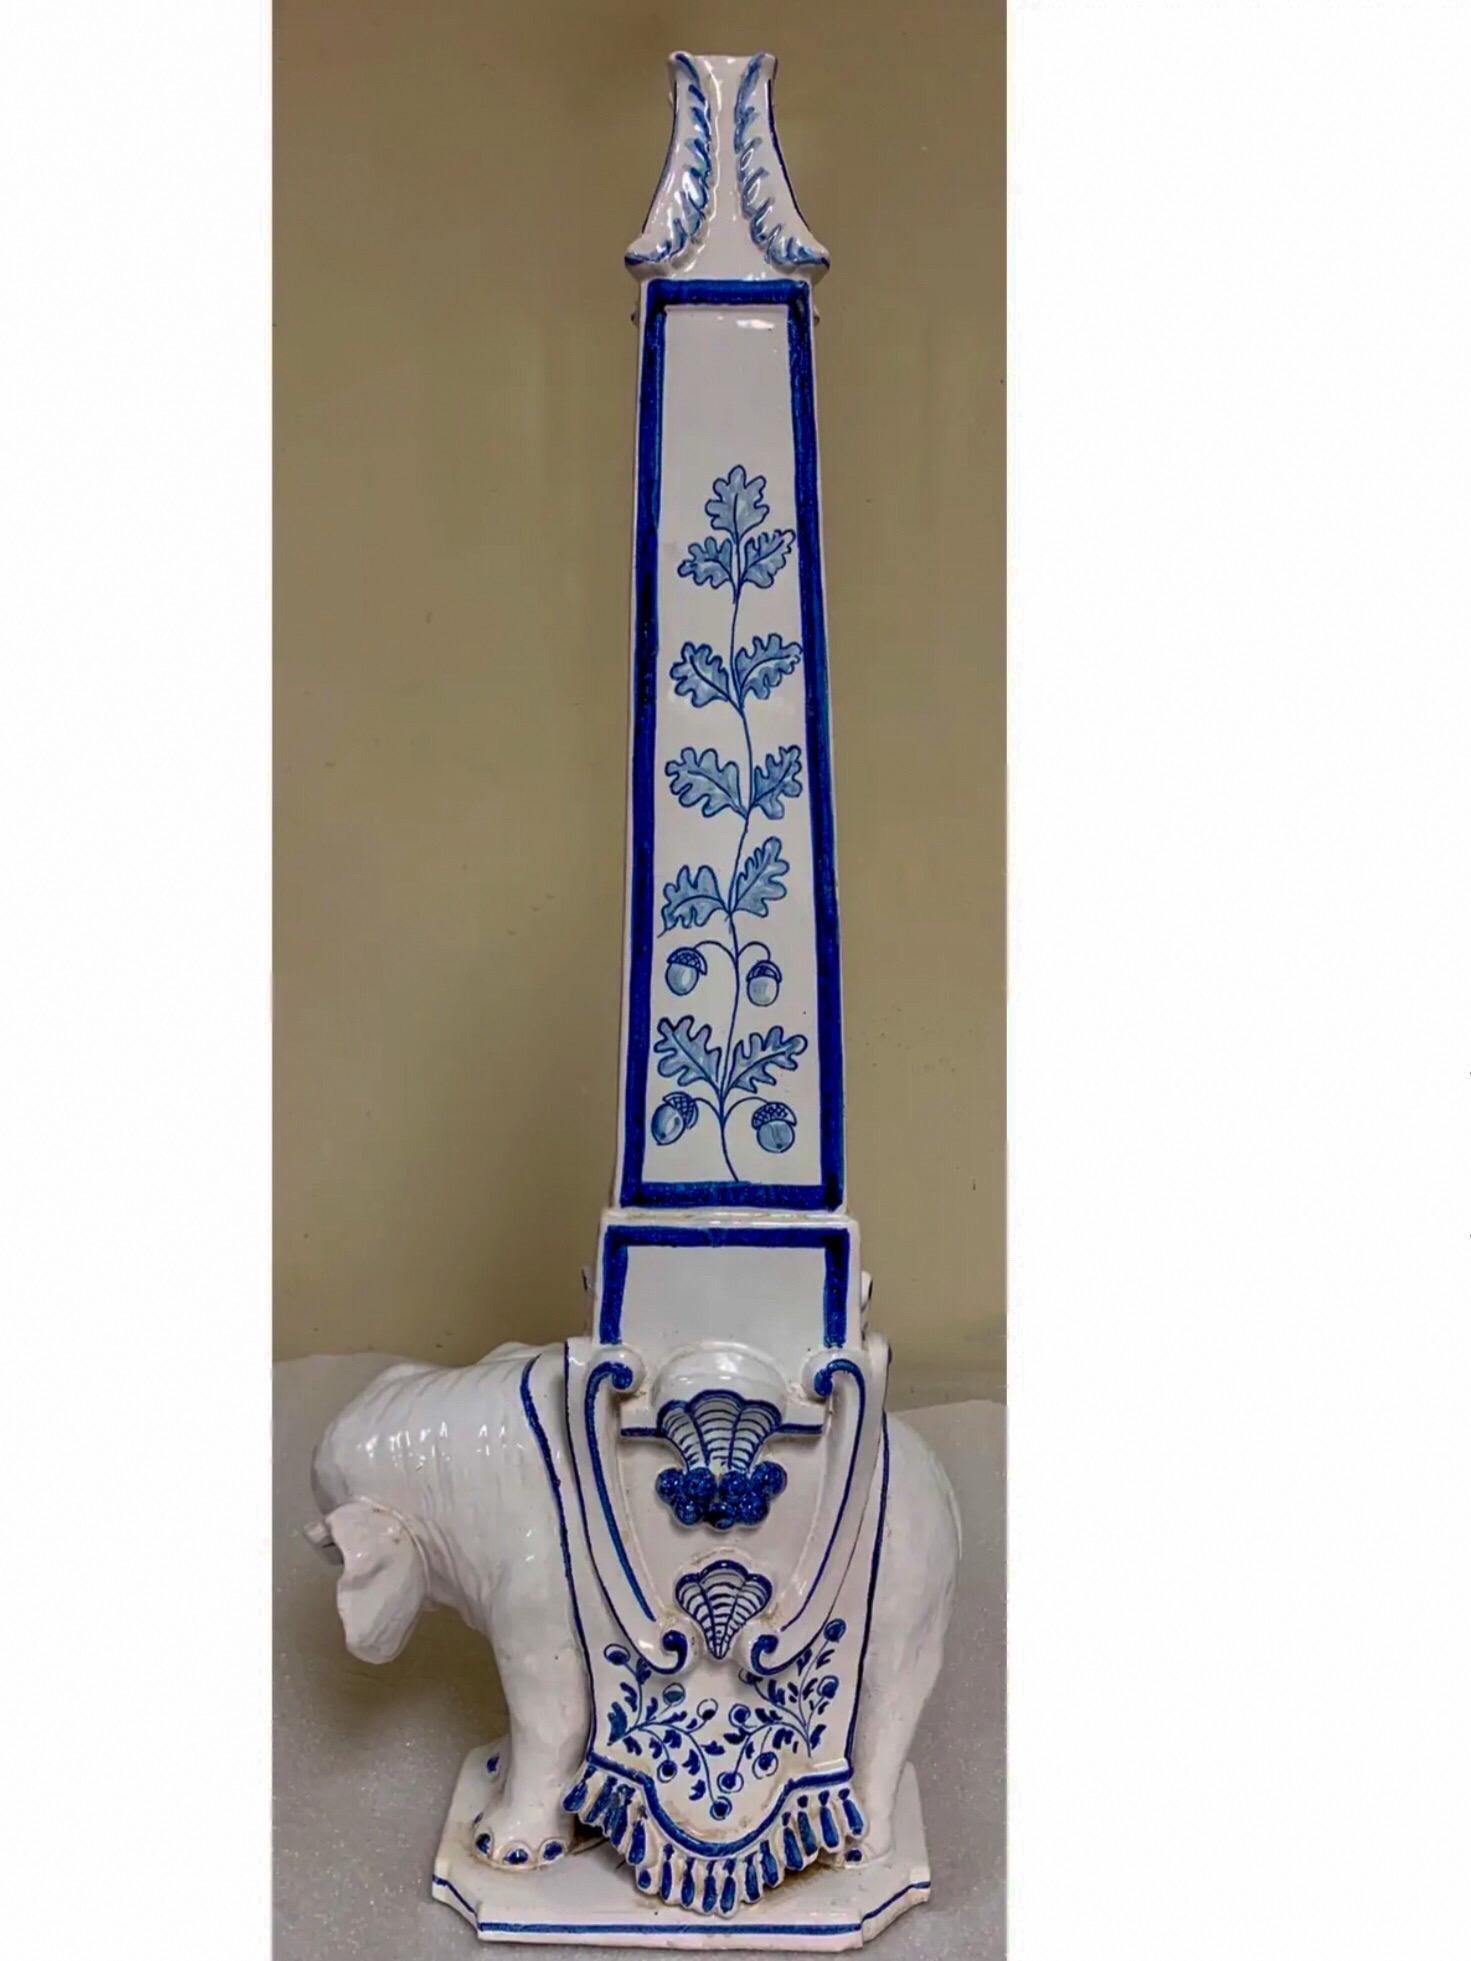 This is a 1960s signed and numbered pair of blue and white terracotta elephant obelisks hand crafted by Meiselman Imports in Italy. They are in very good condition.